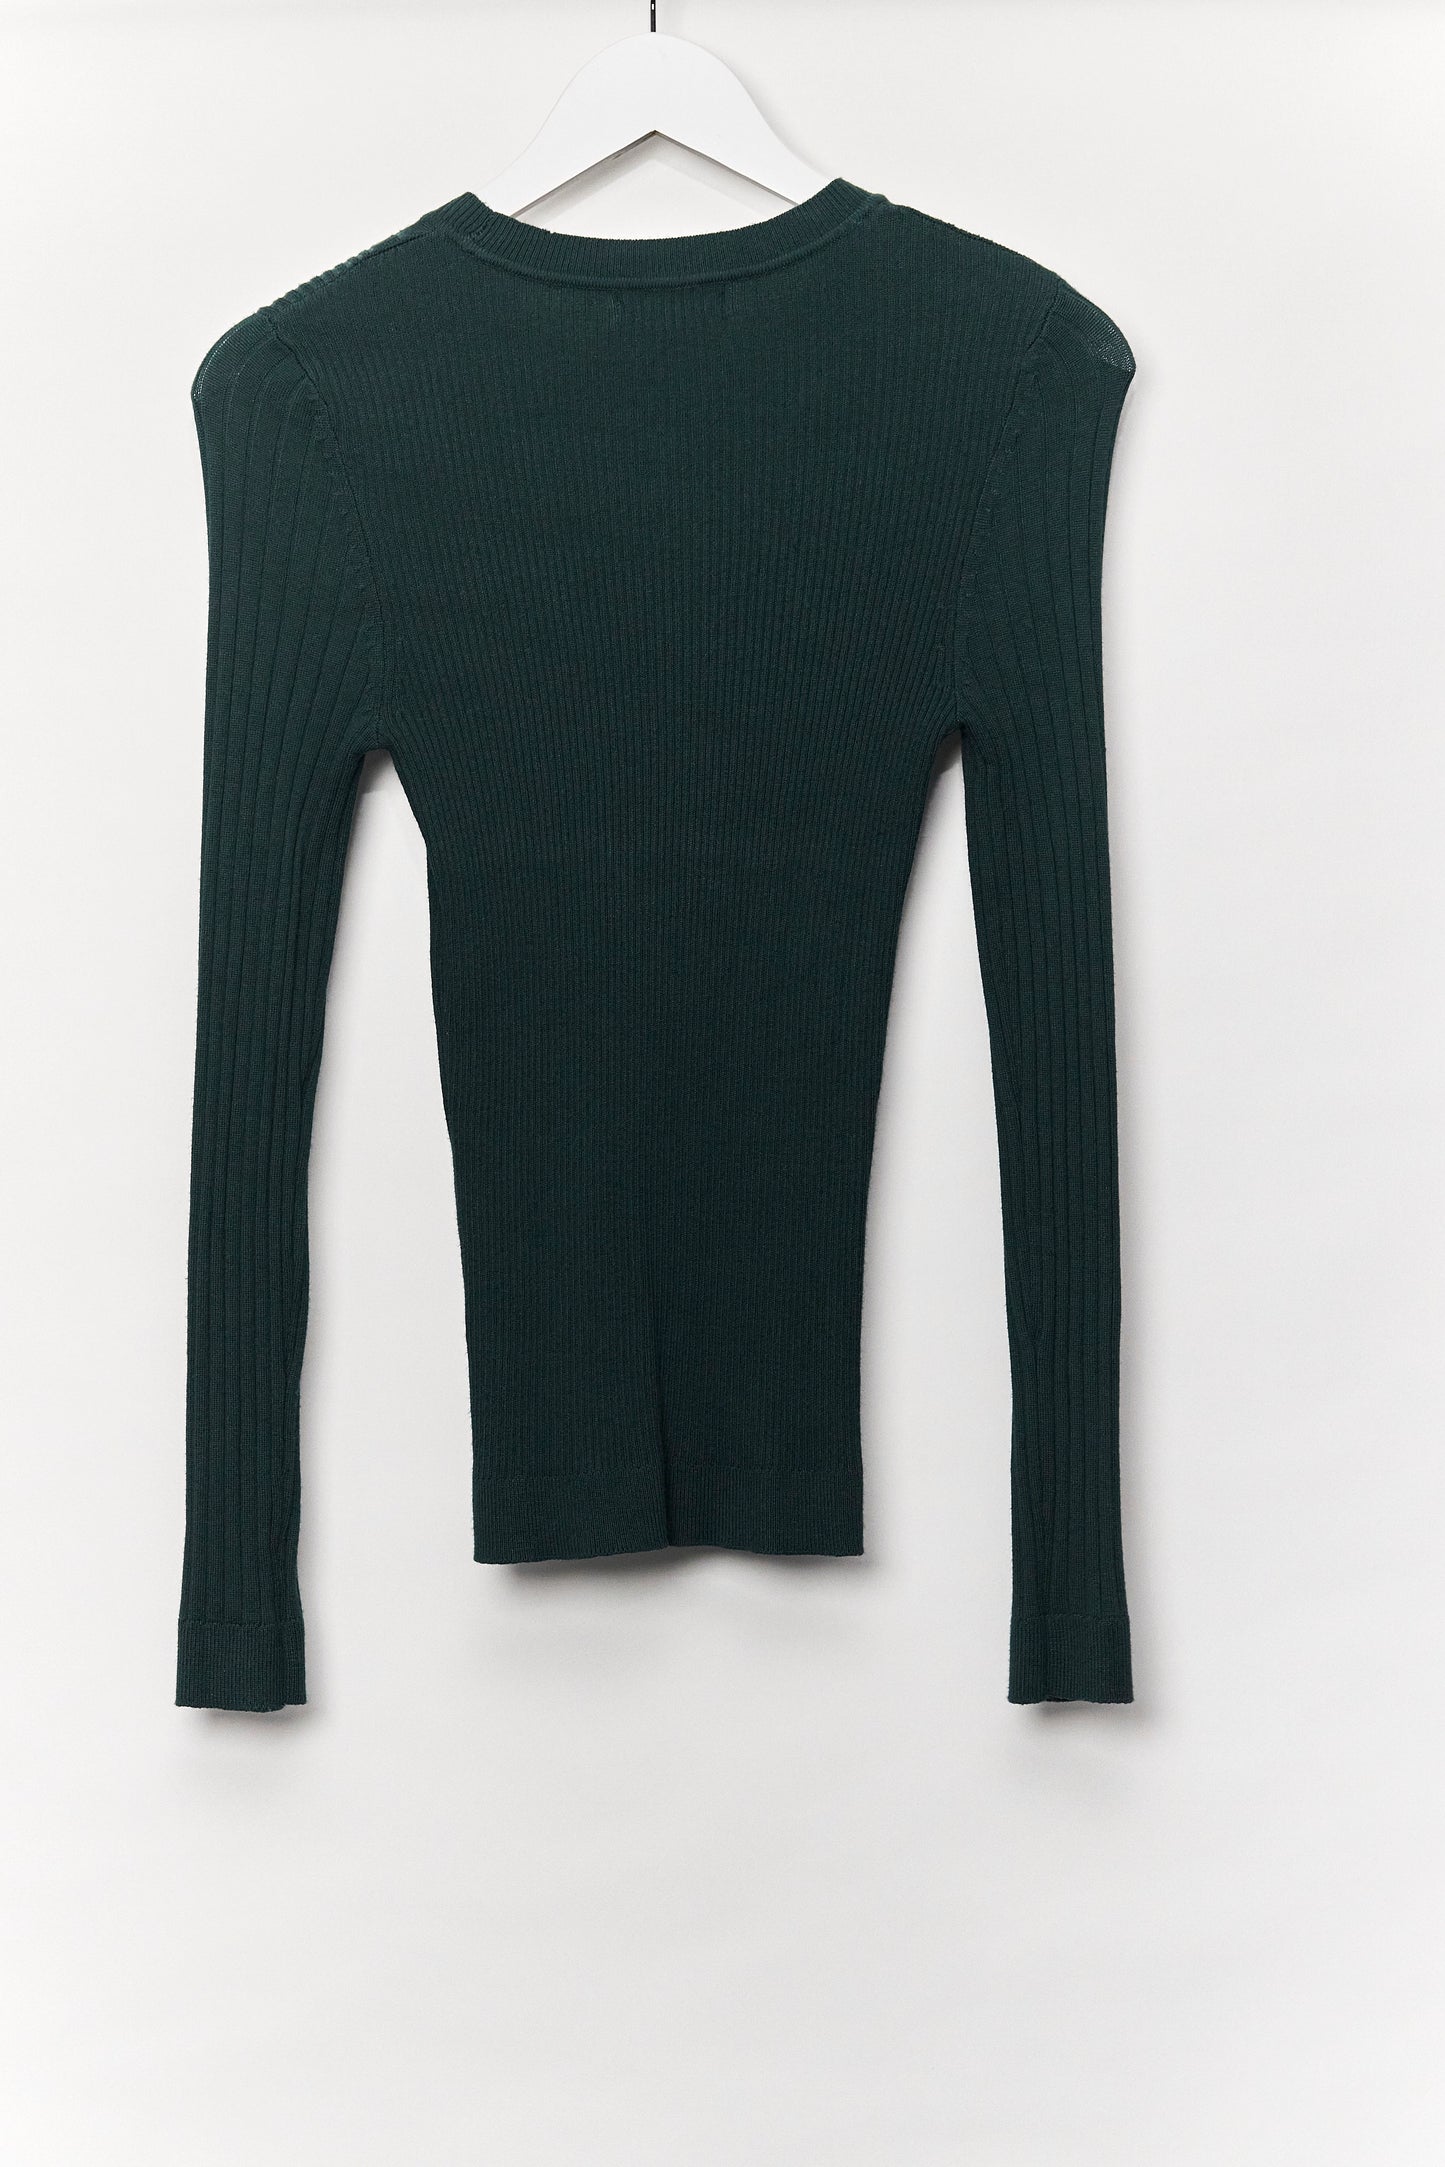 Womens New Look Green Ribbed sweater Size 8